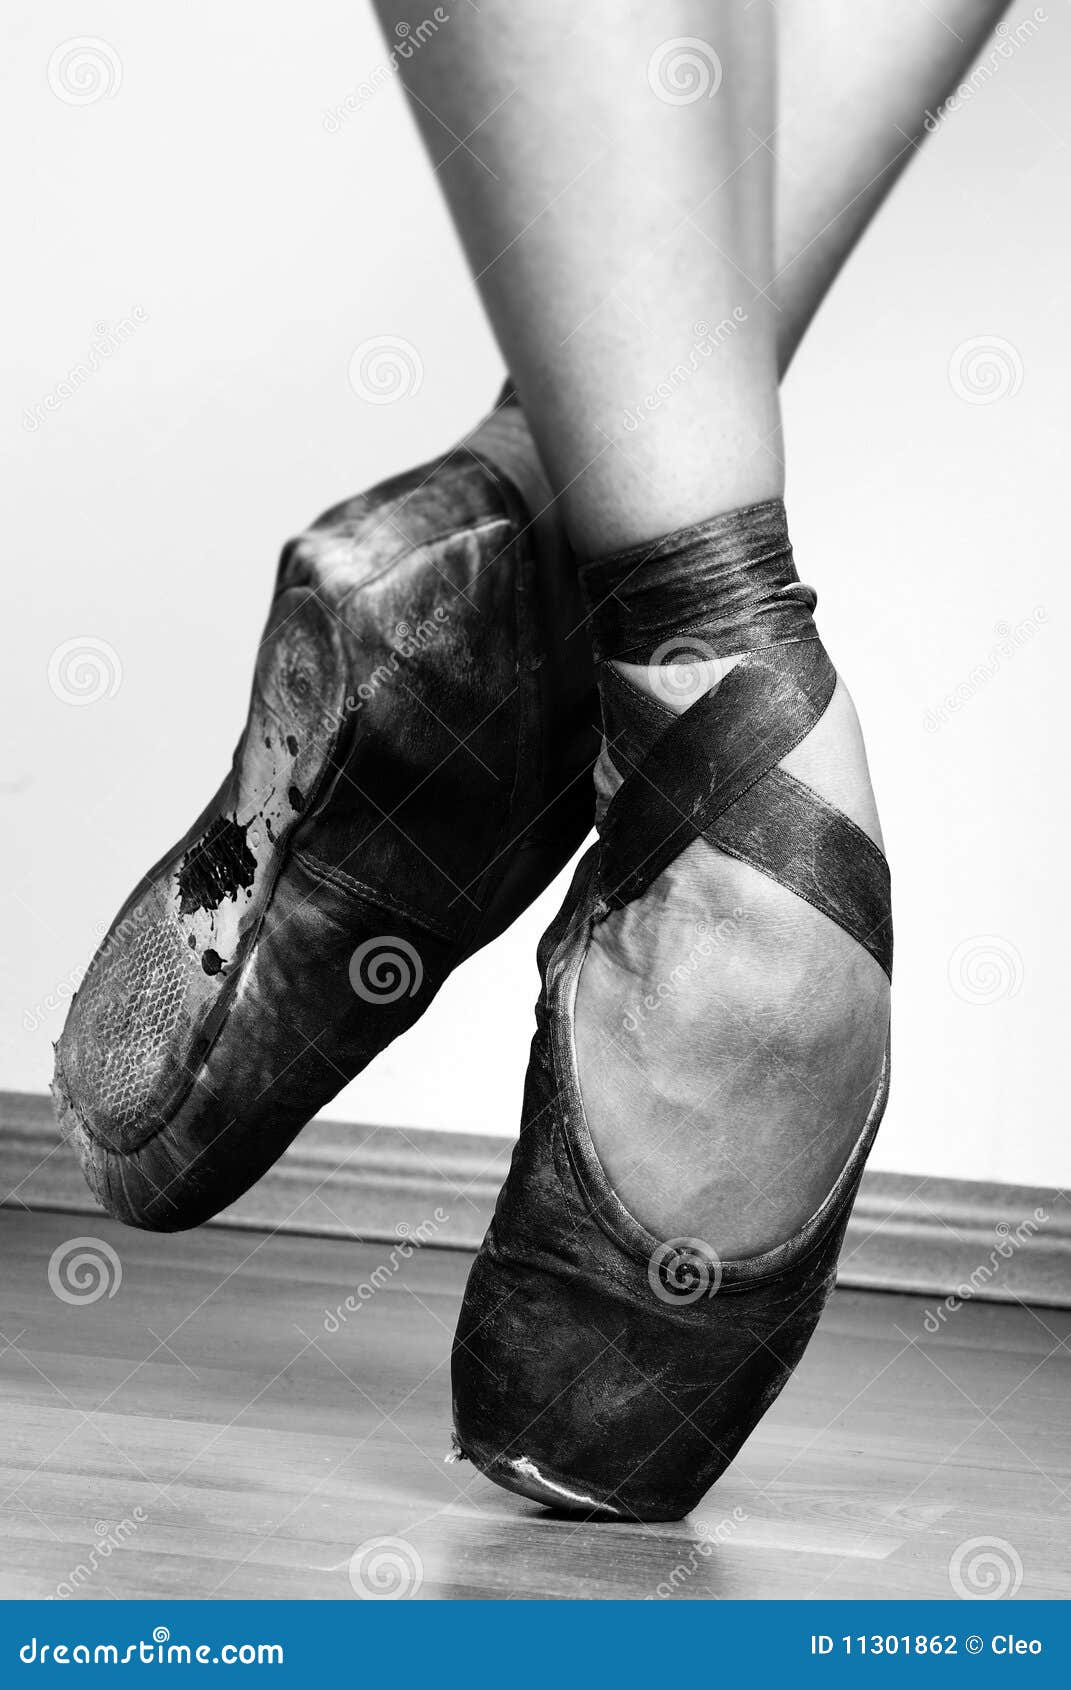 Ballet Shoes stock photo. Image of foot, arch, dancer - 11301862